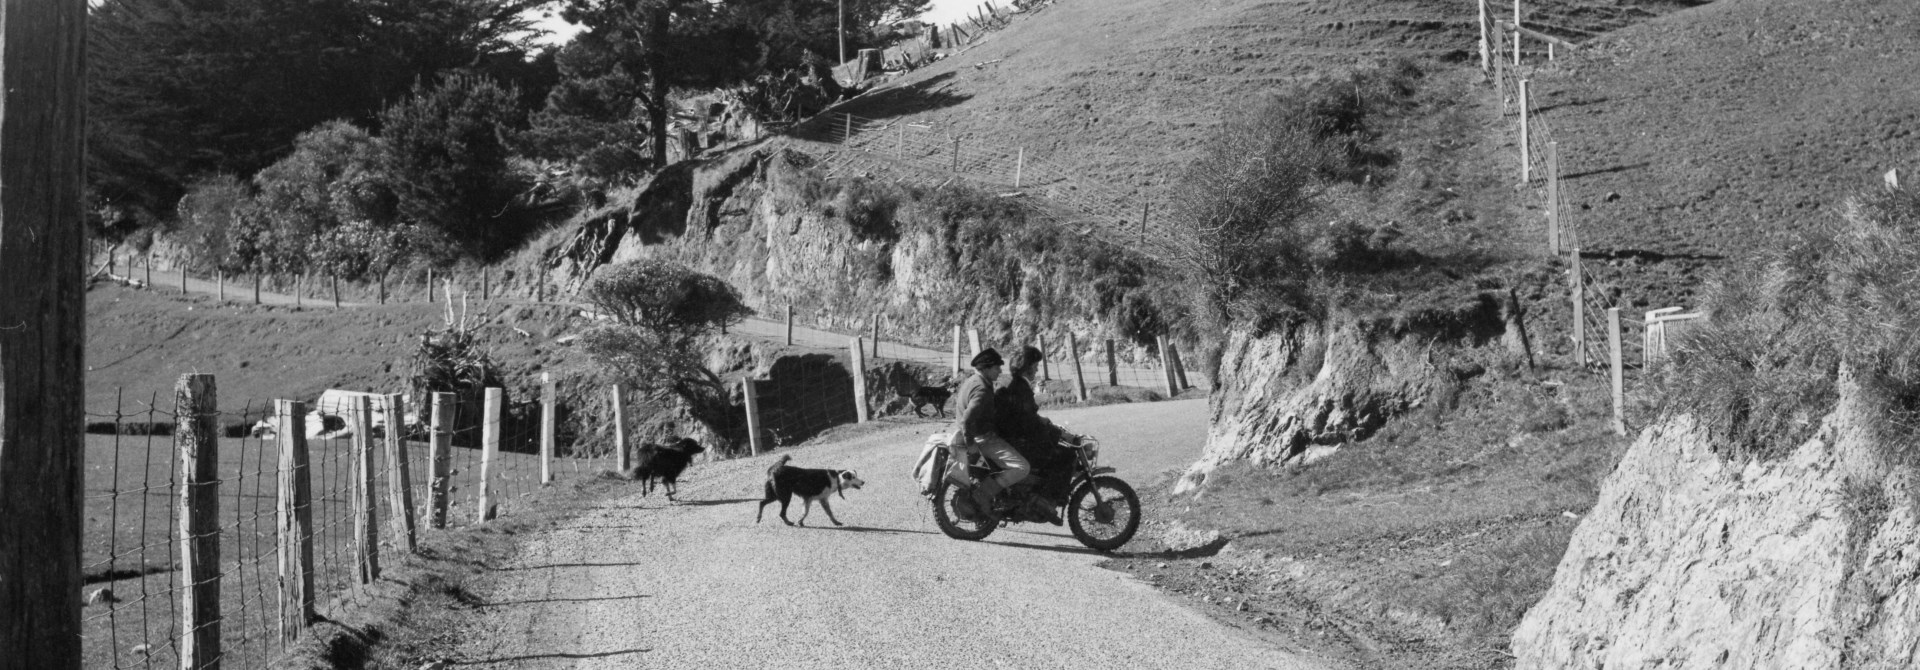 A black and white photo of a couple on a dirt road on the back of a motorbike being followed by two dogs.